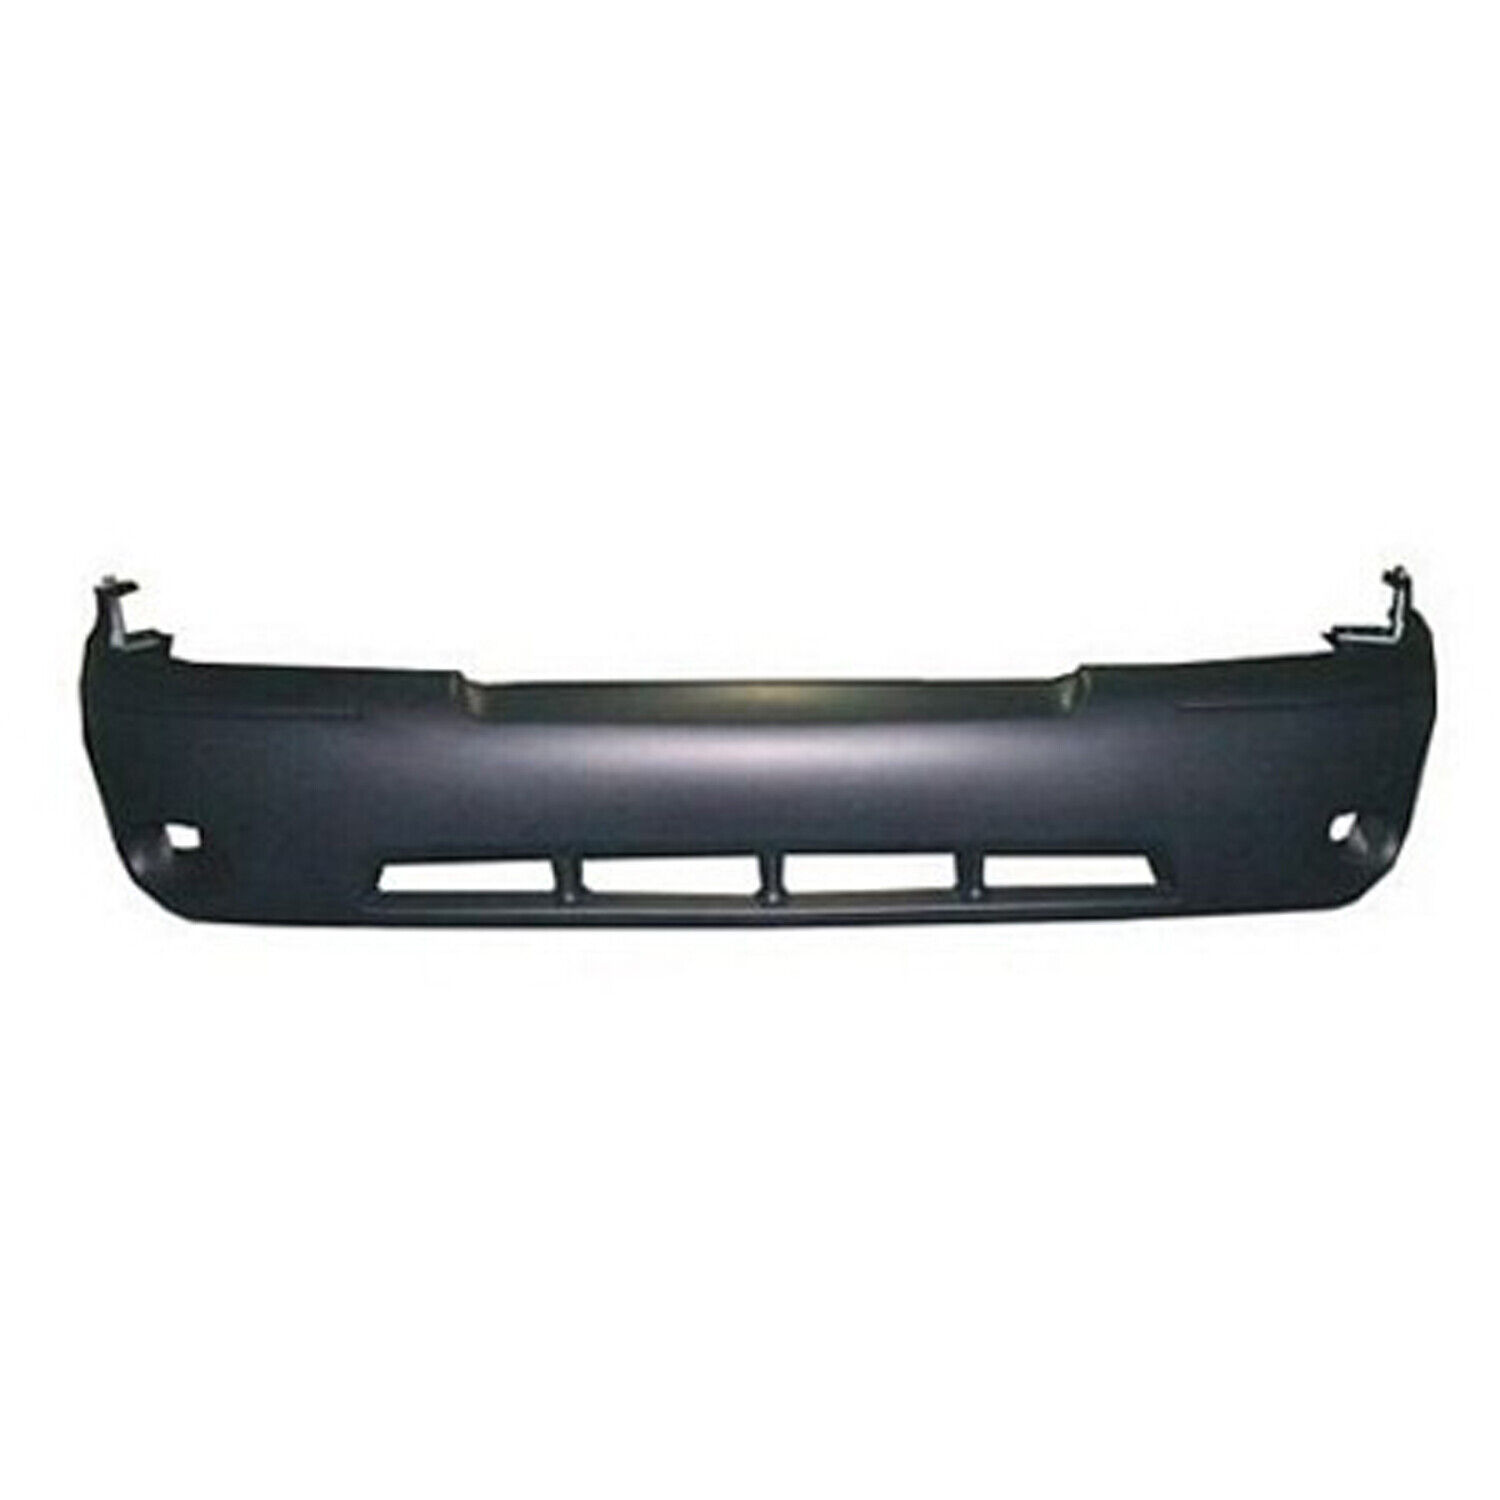 FO1000529 New Replacement Front Bumper Cover Fits 2003-2004 Mercury Marauder